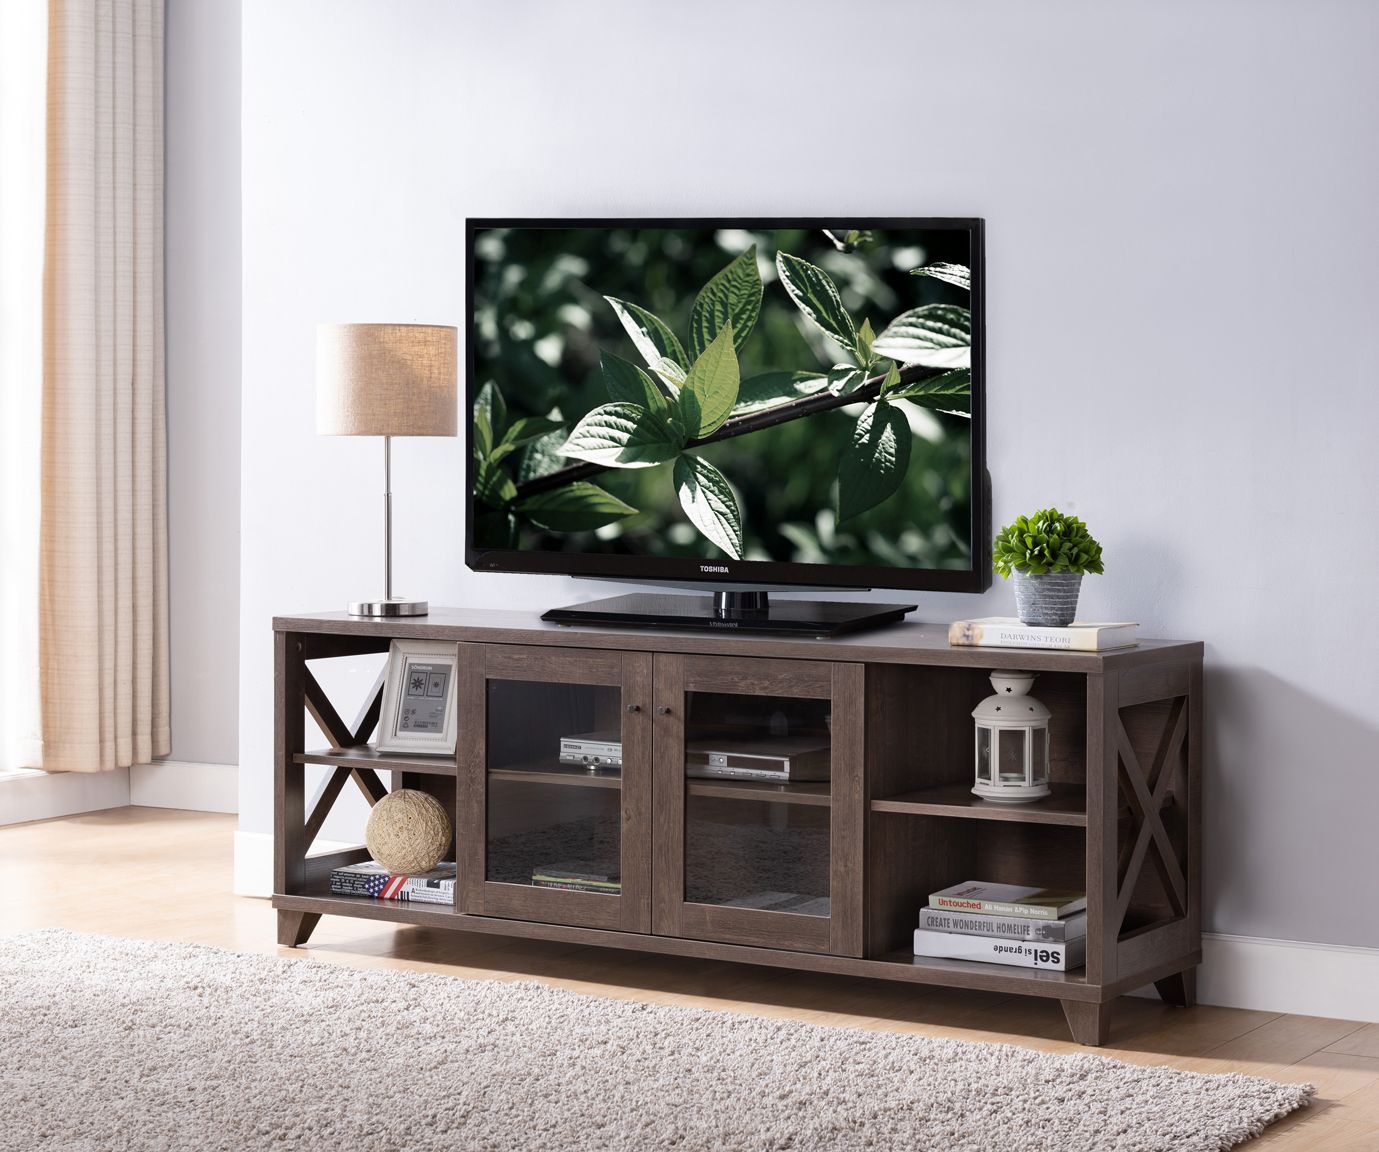 Id Usa 182321 Walnut Oak Color Tv Stand | Home In Oak Tv Cabinet With Doors (Photo 2 of 15)